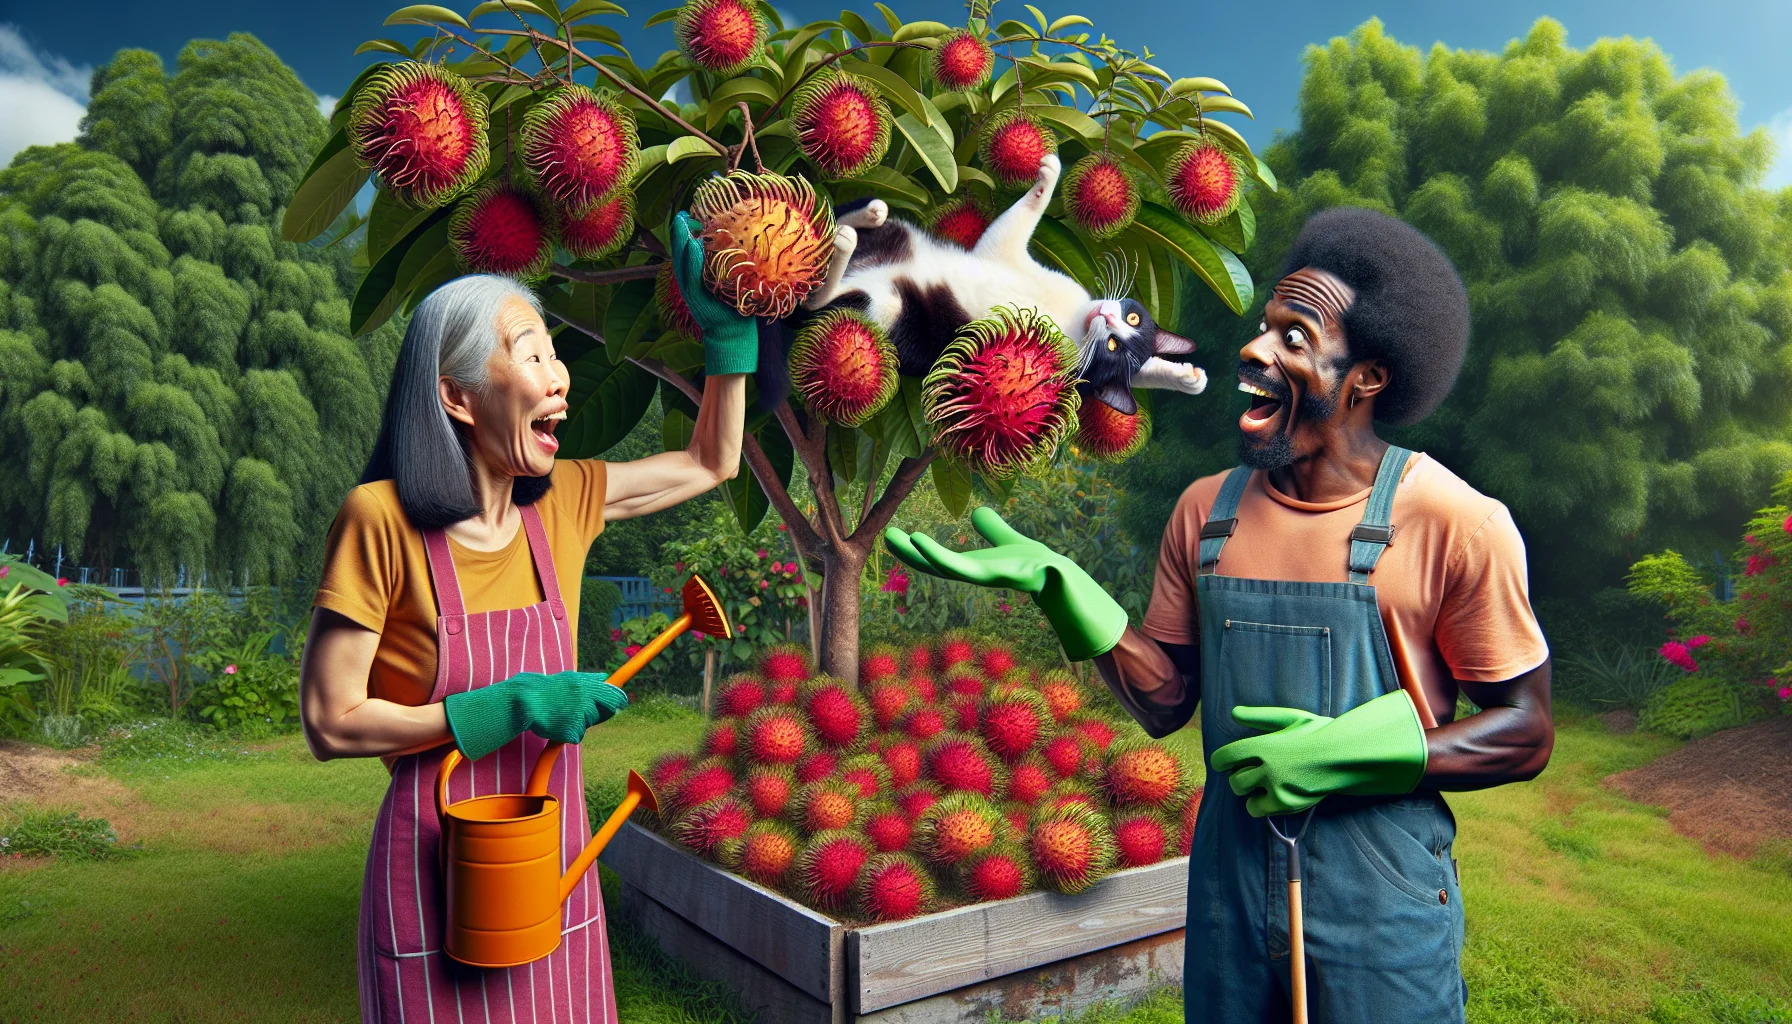 Imagine a humorous garden scene meant to evoke the enticing flavor of rambutan. In the heart of the garden, there is a giant, vividly colored rambutan tree bearing ripe fruit. An East Asian woman and a Black man, both hobbyist gardeners, are shocked and delighted by the sight of a cat, upside down with a rambutan stuck on its paw, trying to shake it off. They're enjoying the moment, laughing and pointing at the spectacle, their green gloves and tools in hand. The woman holds a watering can, and the man has a trowel. Their joy and amusement serve as a playful invitation to the joys of gardening and unique flavors.